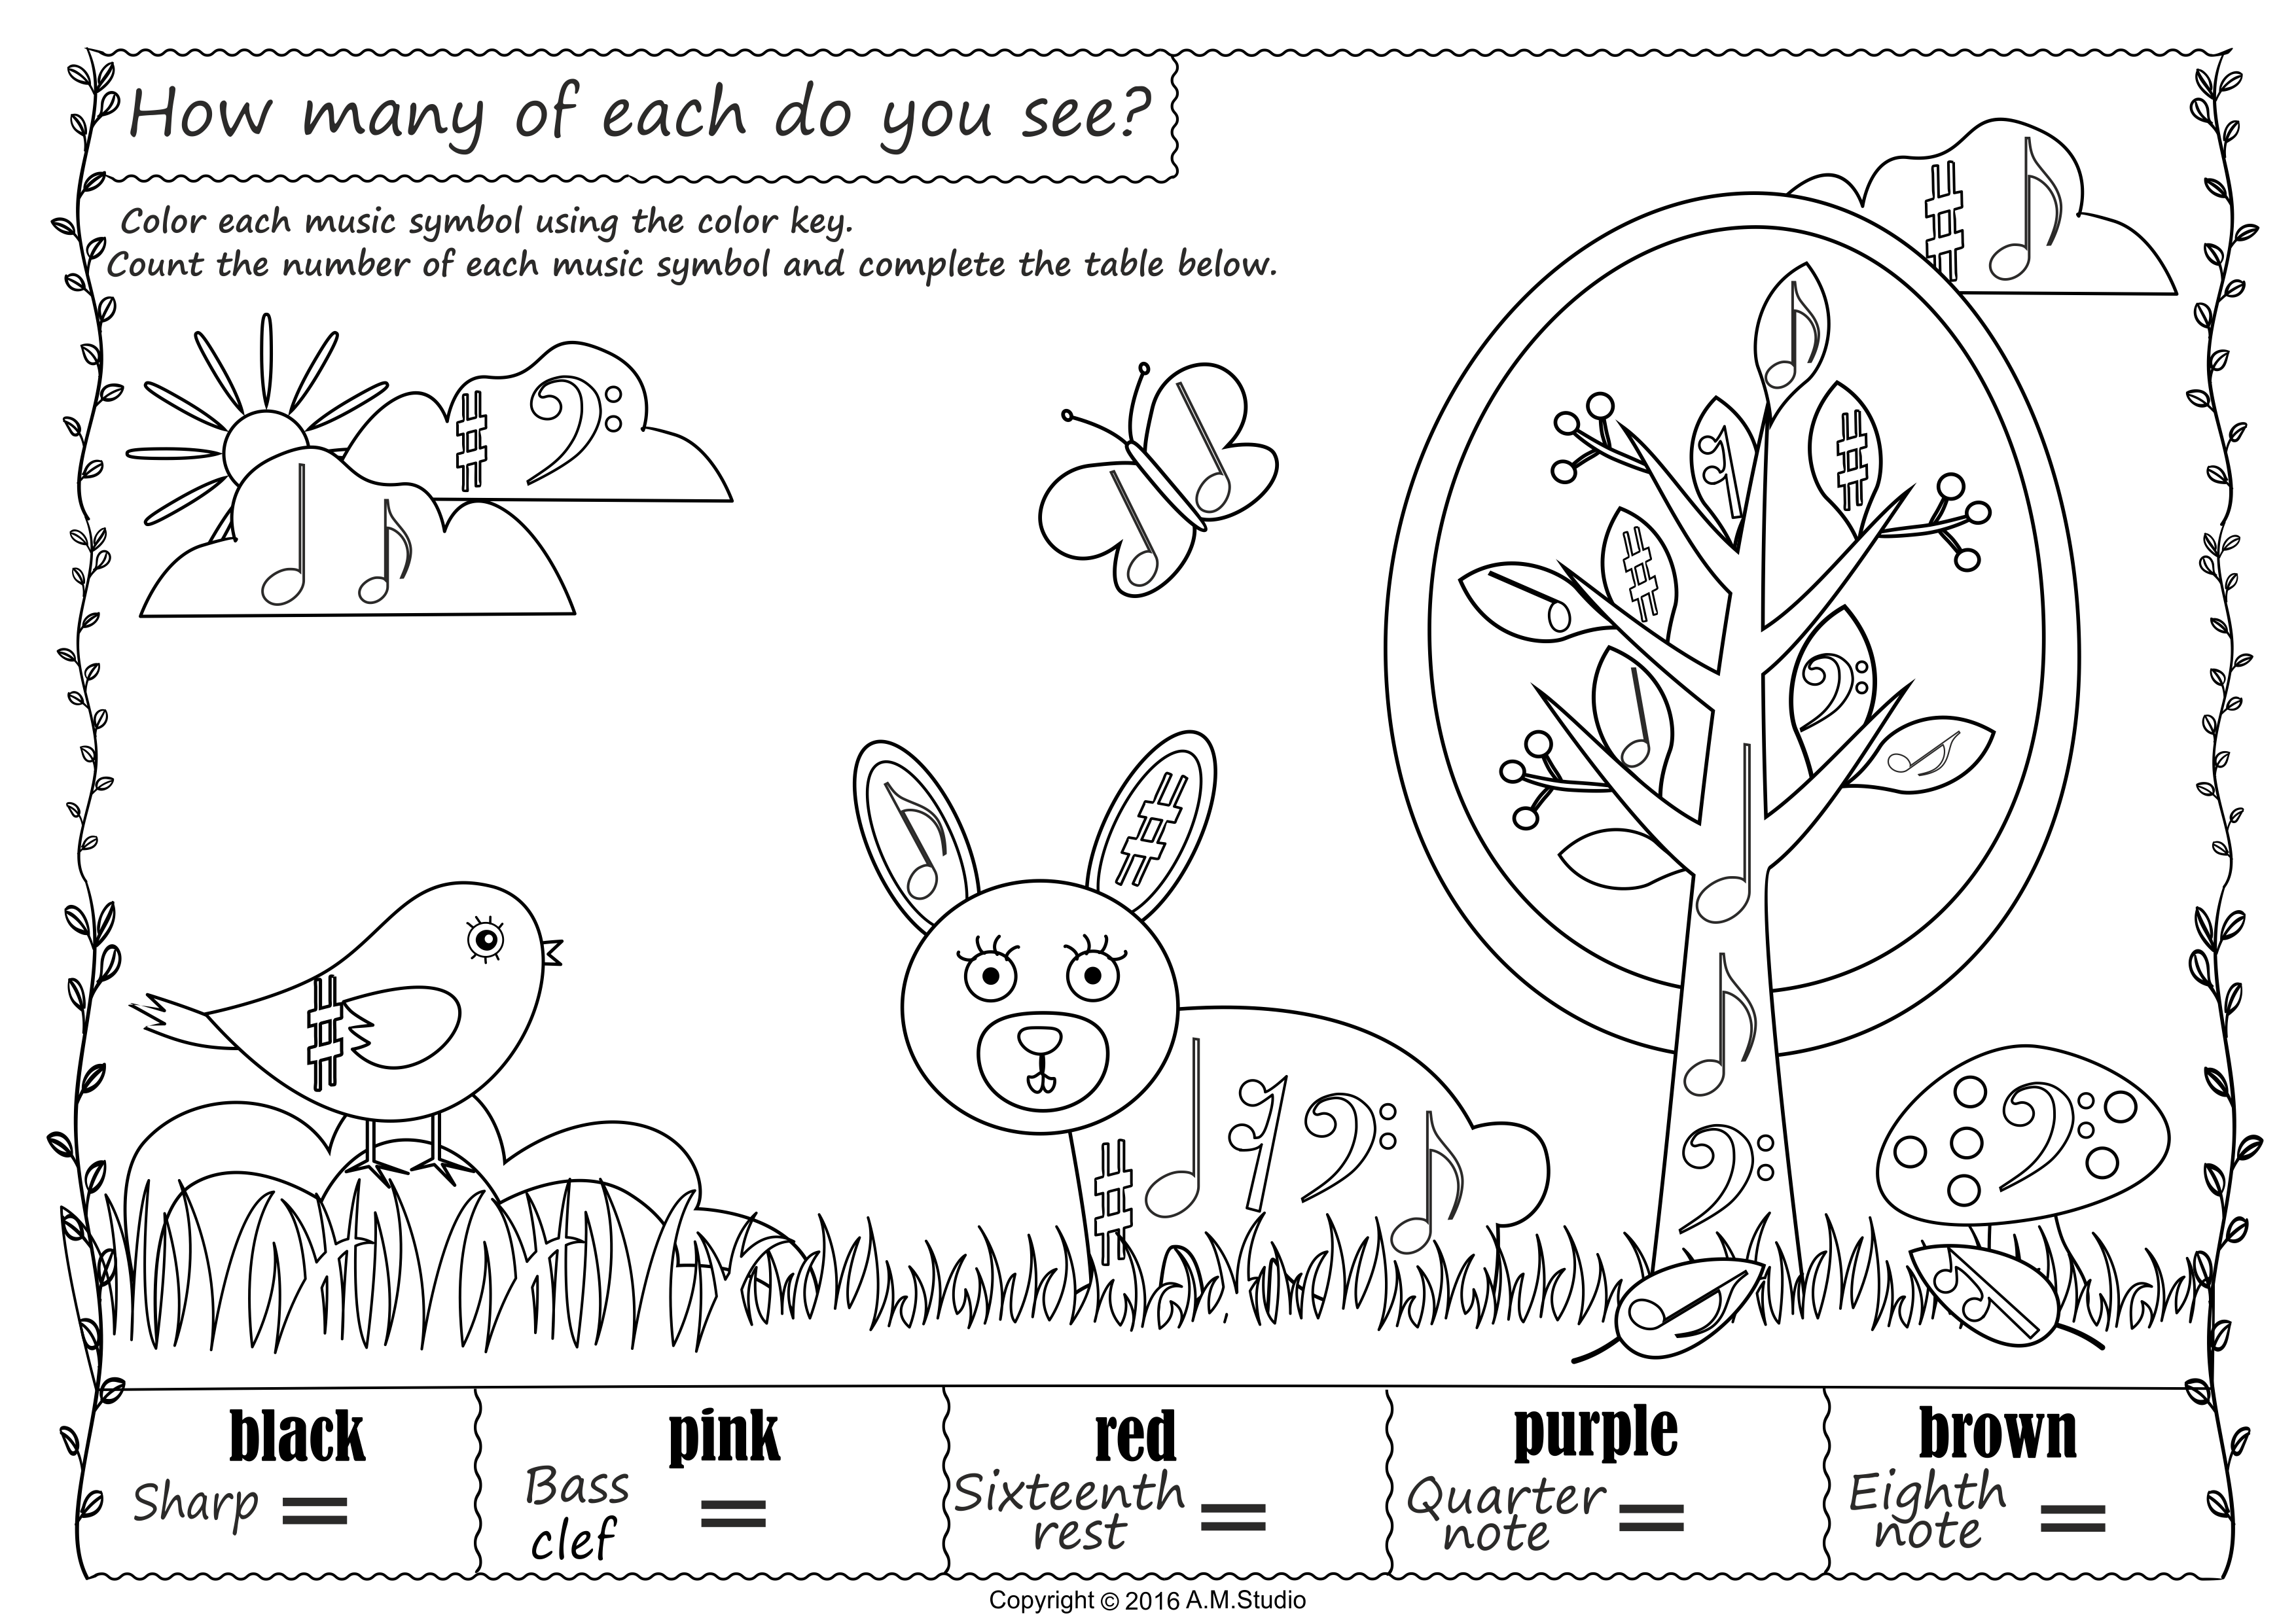 I Spy Music Symbols Coloring Activities | Fall Themed (img # 2)